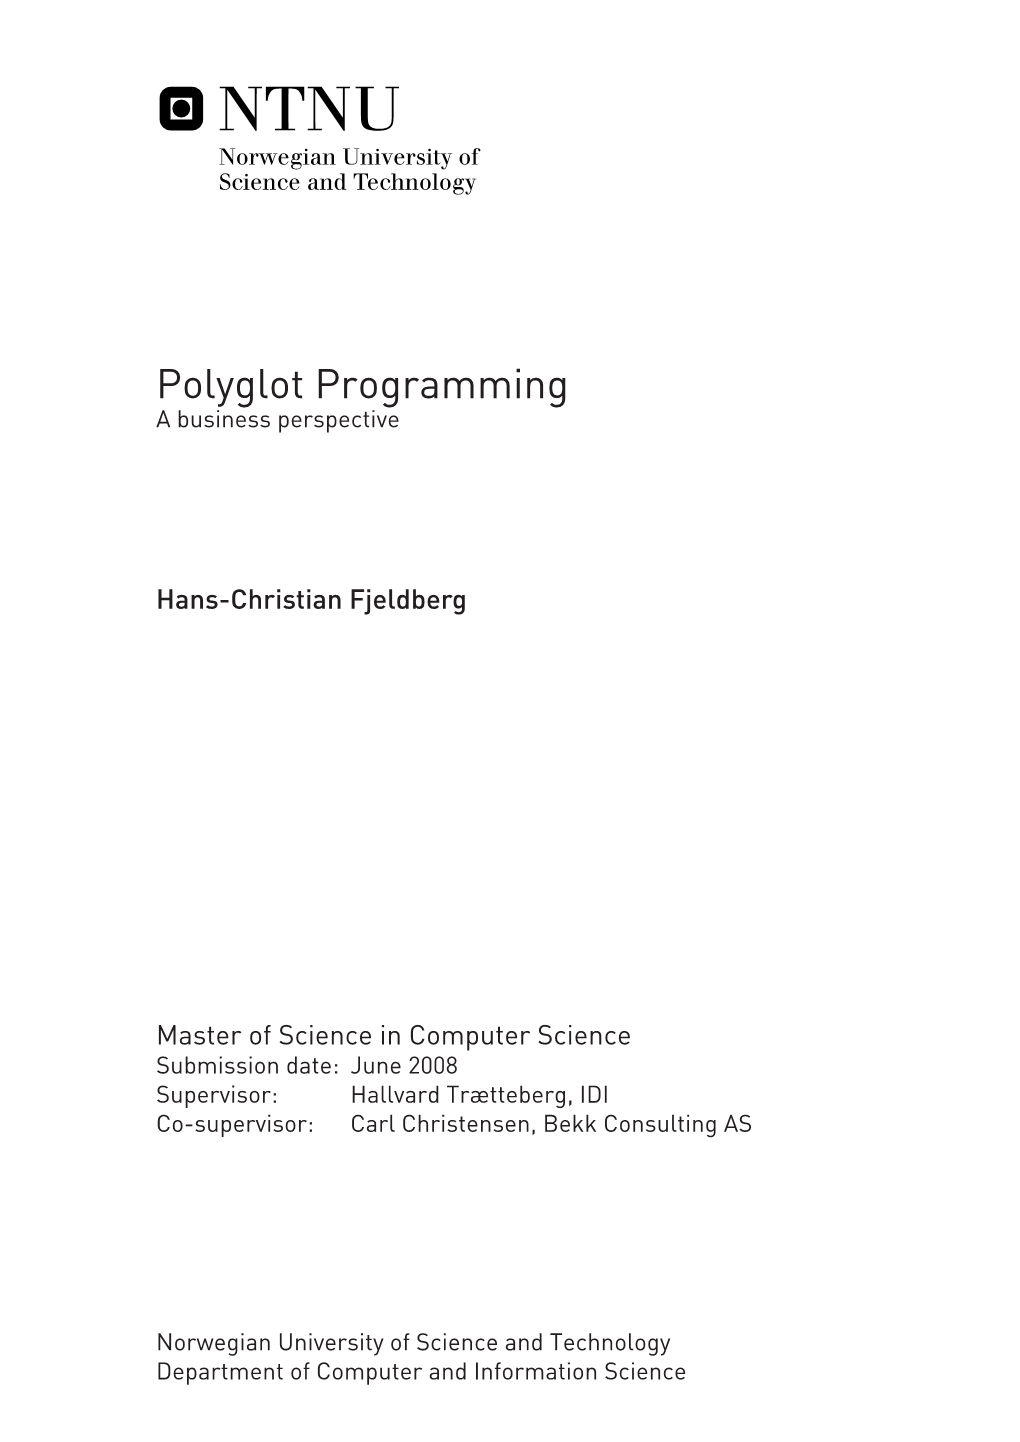 Polyglot Programming a Business Perspective